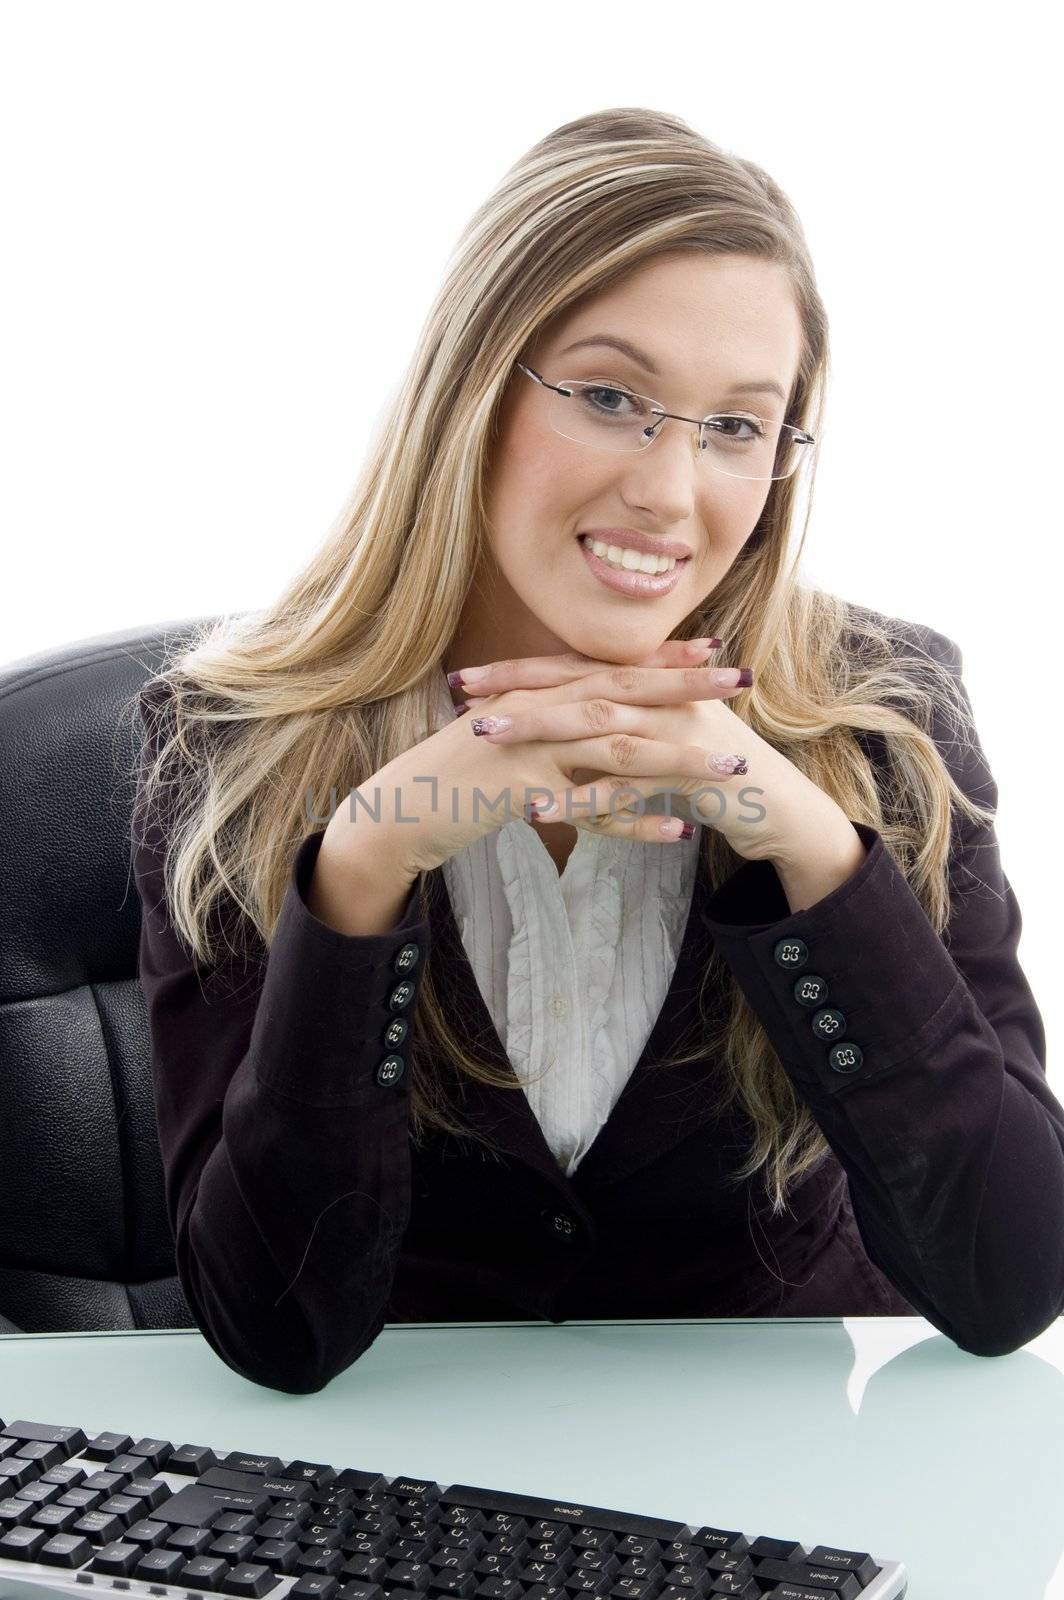 female sitting on chair against white background